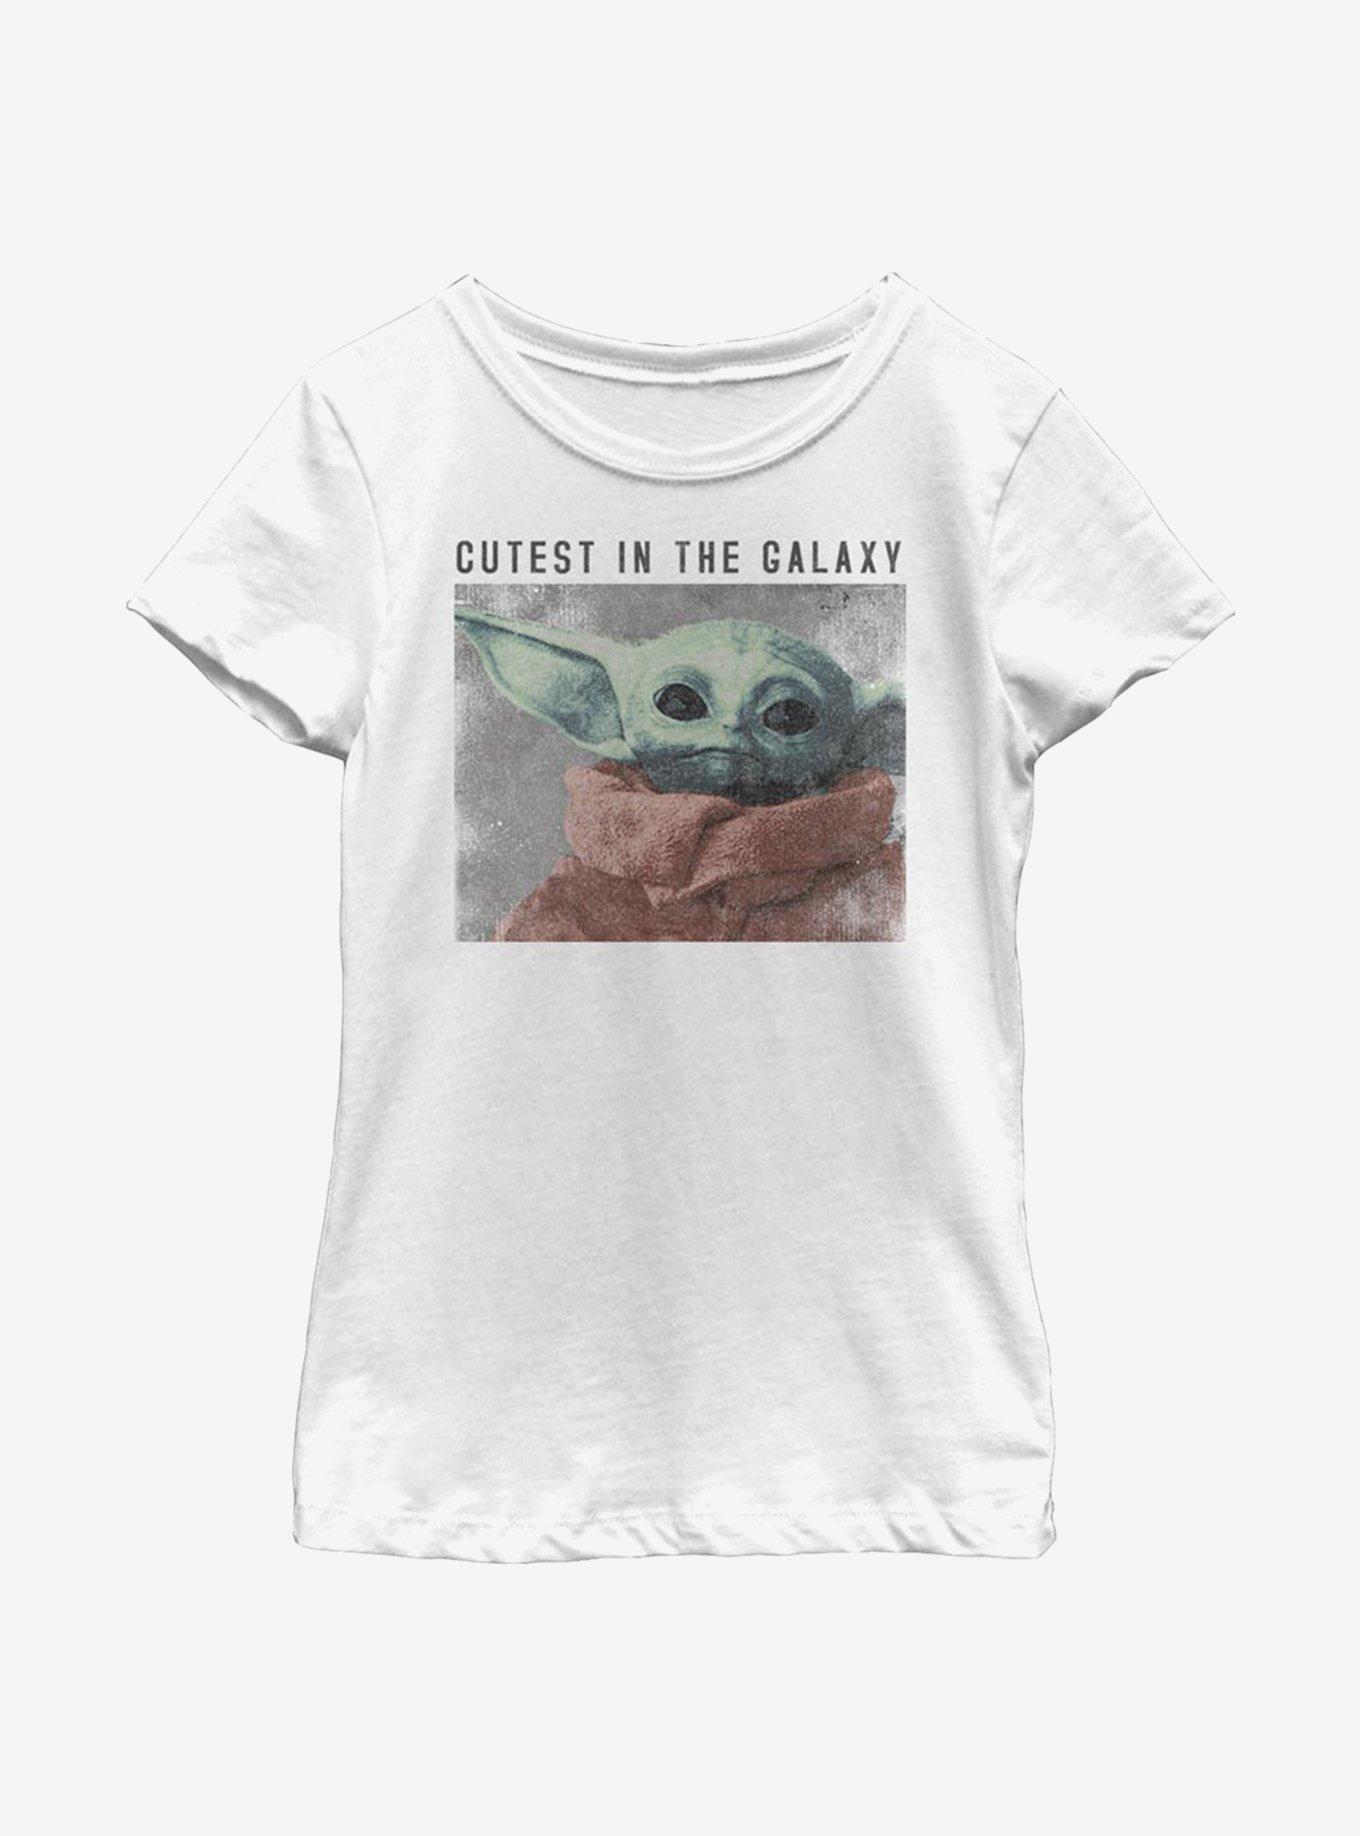 Star Wars The Mandalorian The Child Cutest In The Galaxy Youth Girls T-Shirt, WHITE, hi-res